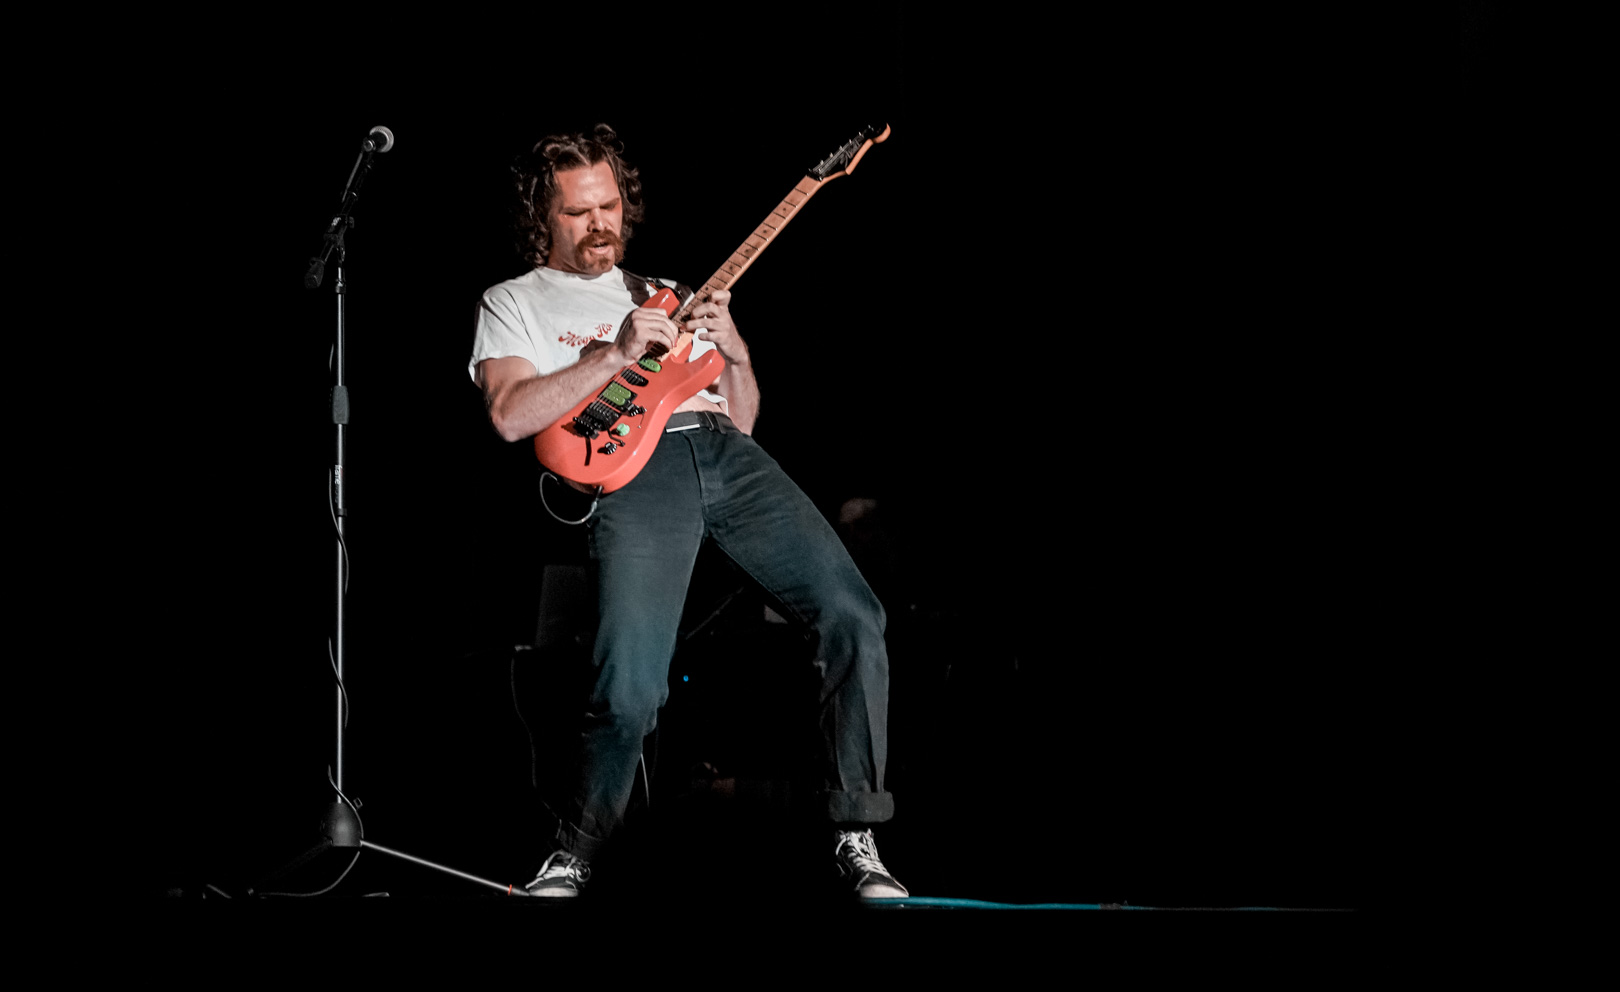 A man plays guitar on stage